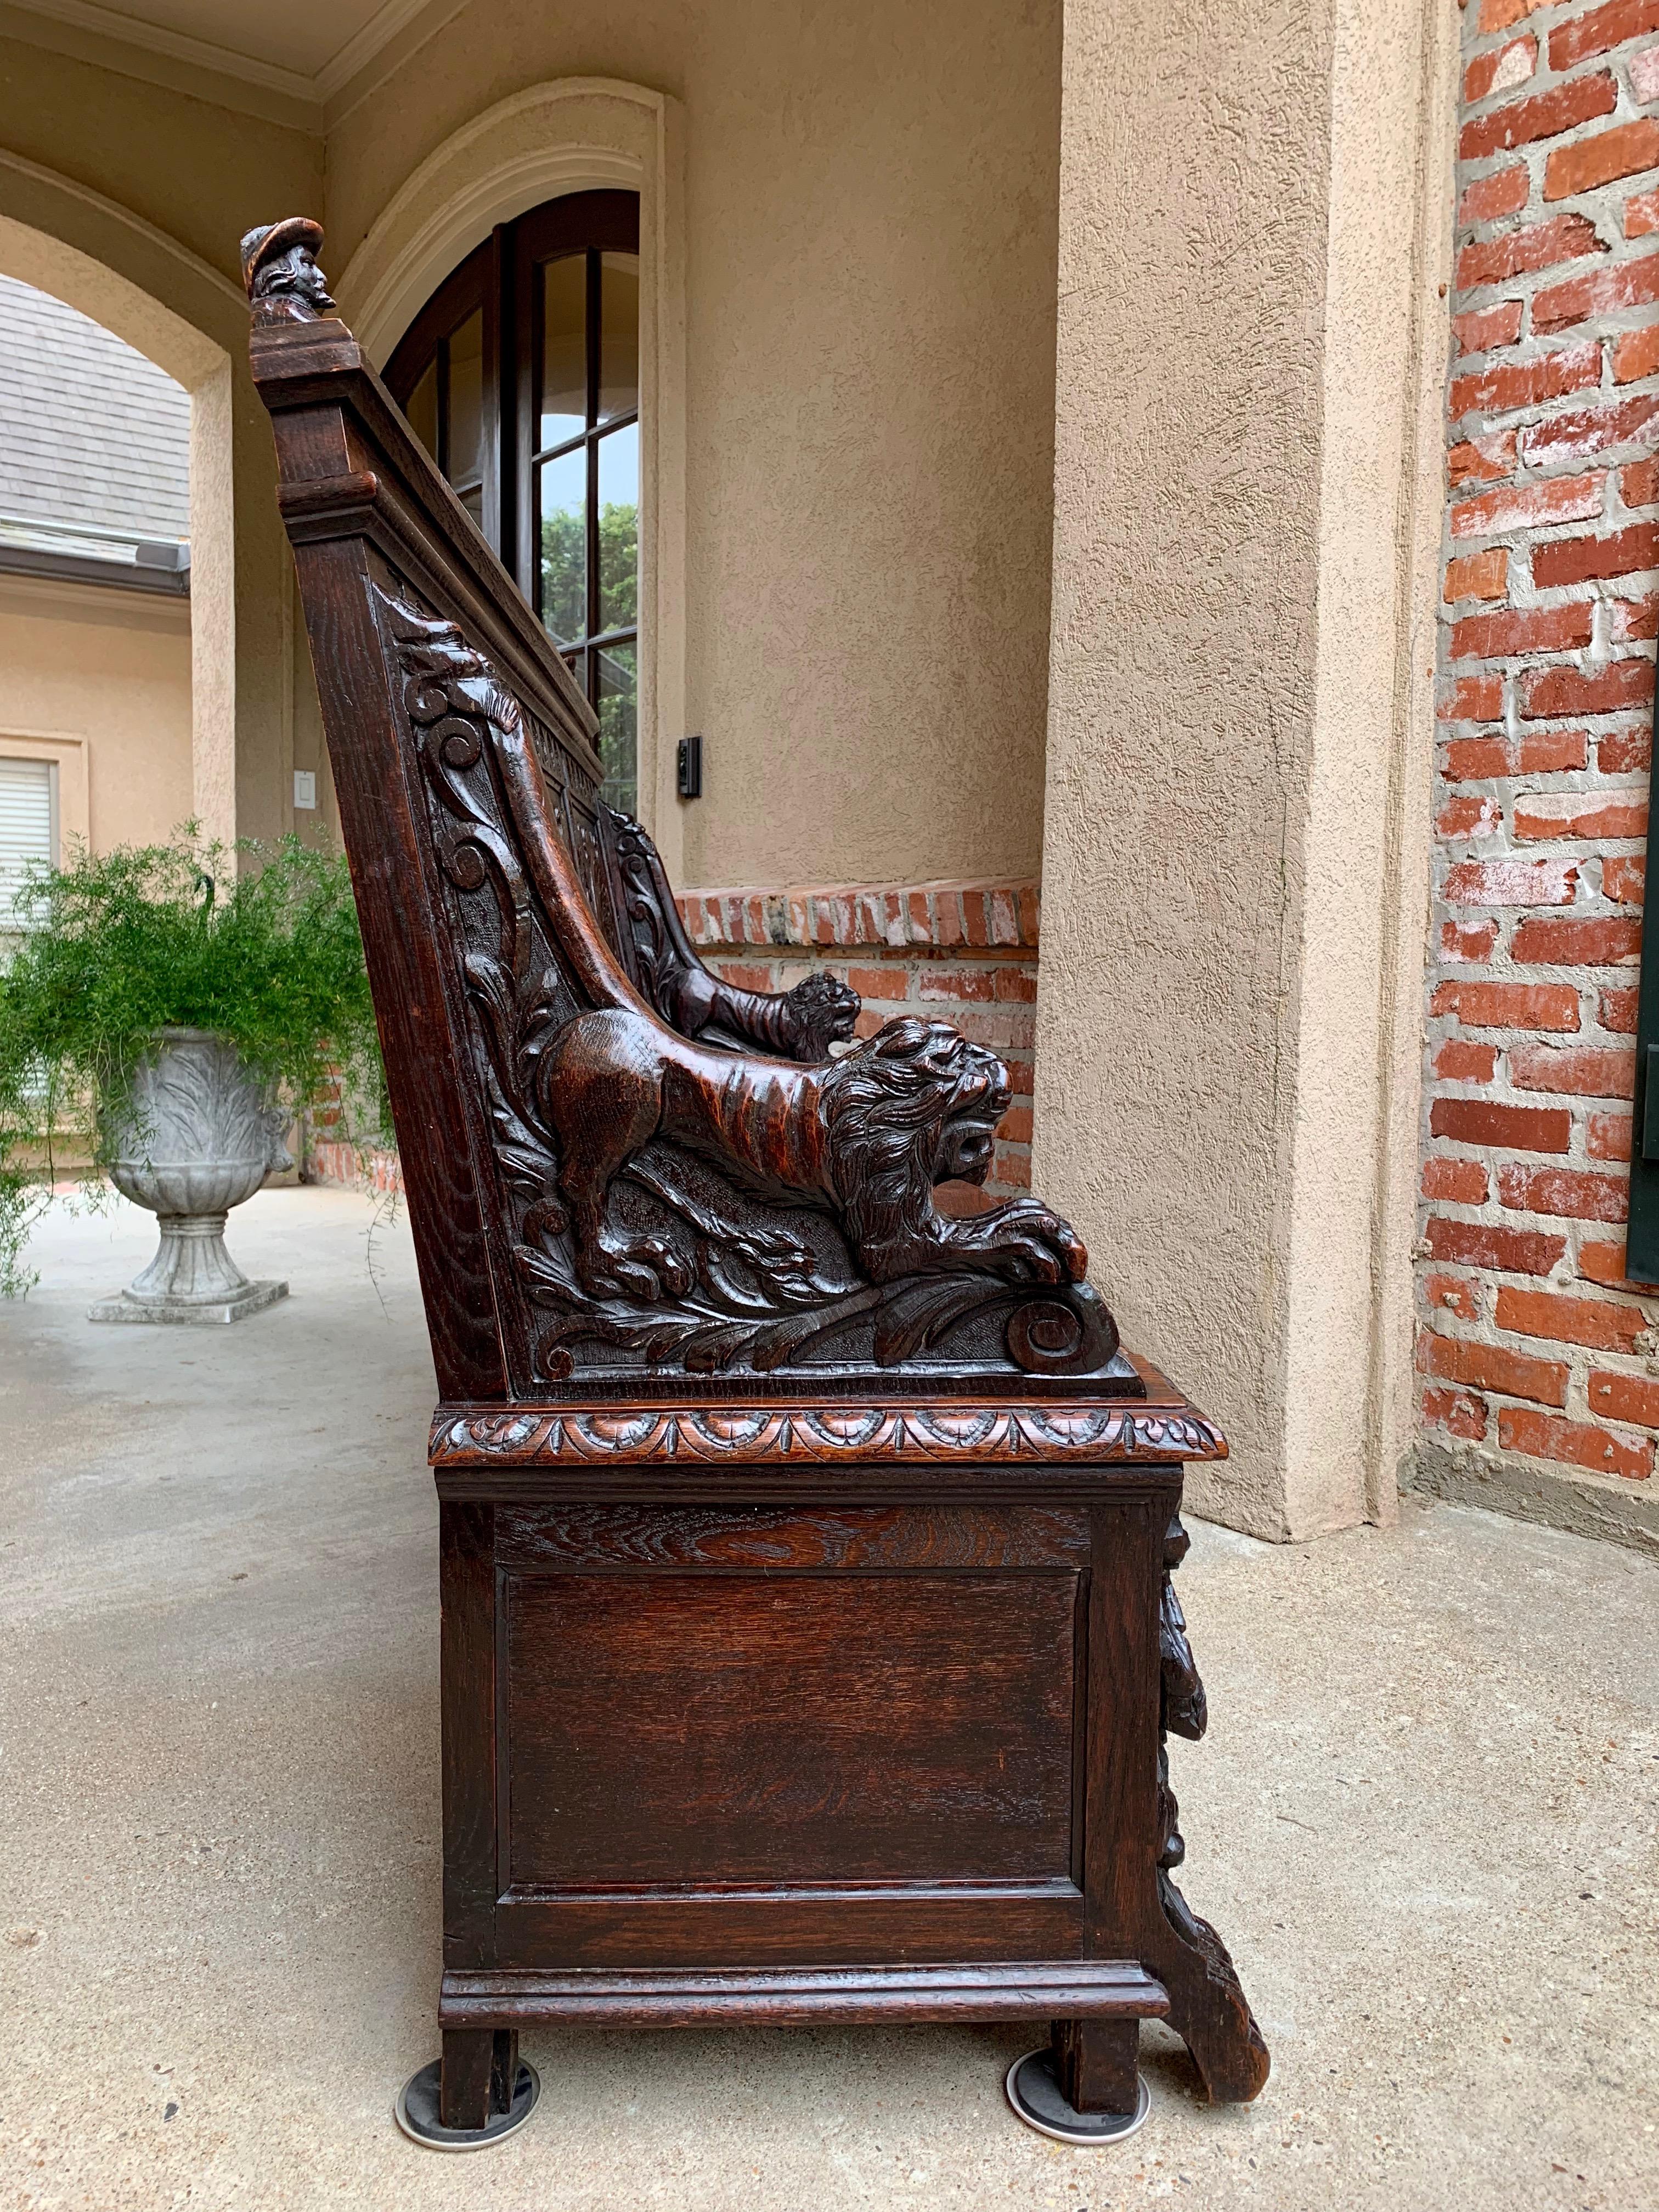 Direct from France, outstanding antique carved French bench, one of the most elaborately carved oak Renaissance hall benches we have found in years and definitely a piece of art!
~Meticulously carved recumbent lions create the arms on either